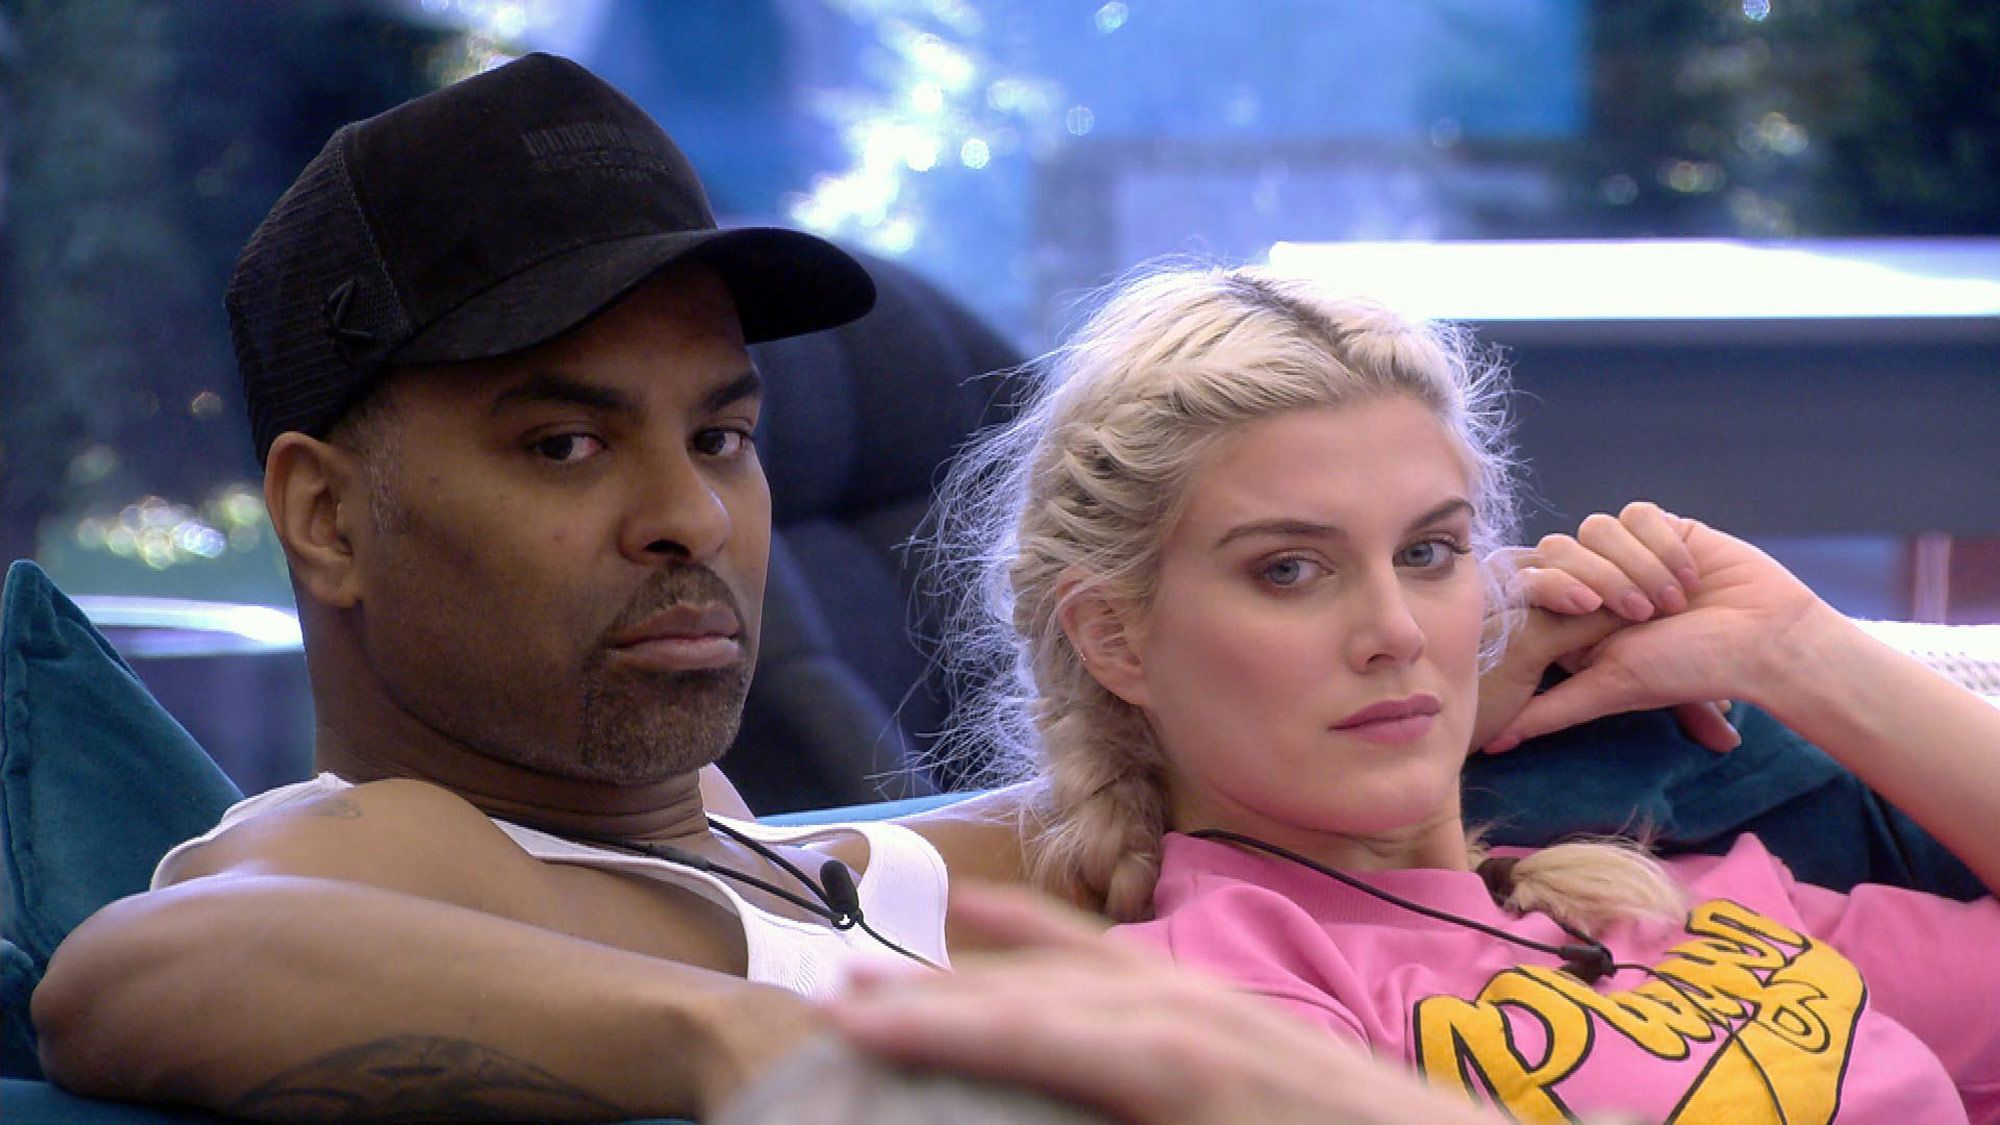 Big Brother James Porn - Celebrity Big Brother's Ashley James reveals she doesn't speak to Ginuwine  anymore